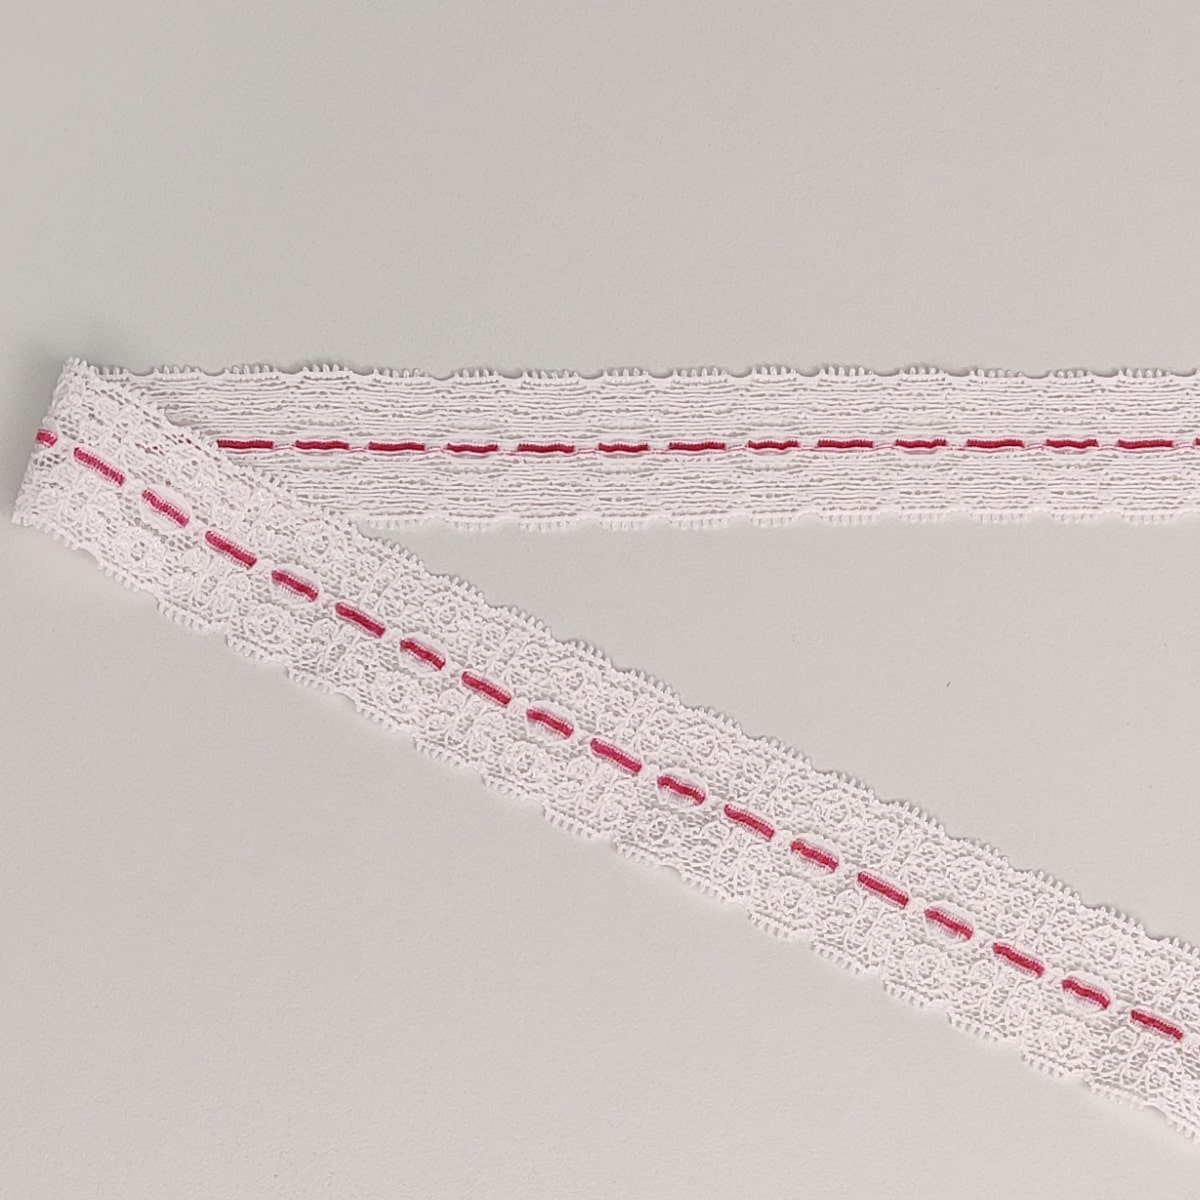 Stretch Lace Trim - White and Pink 